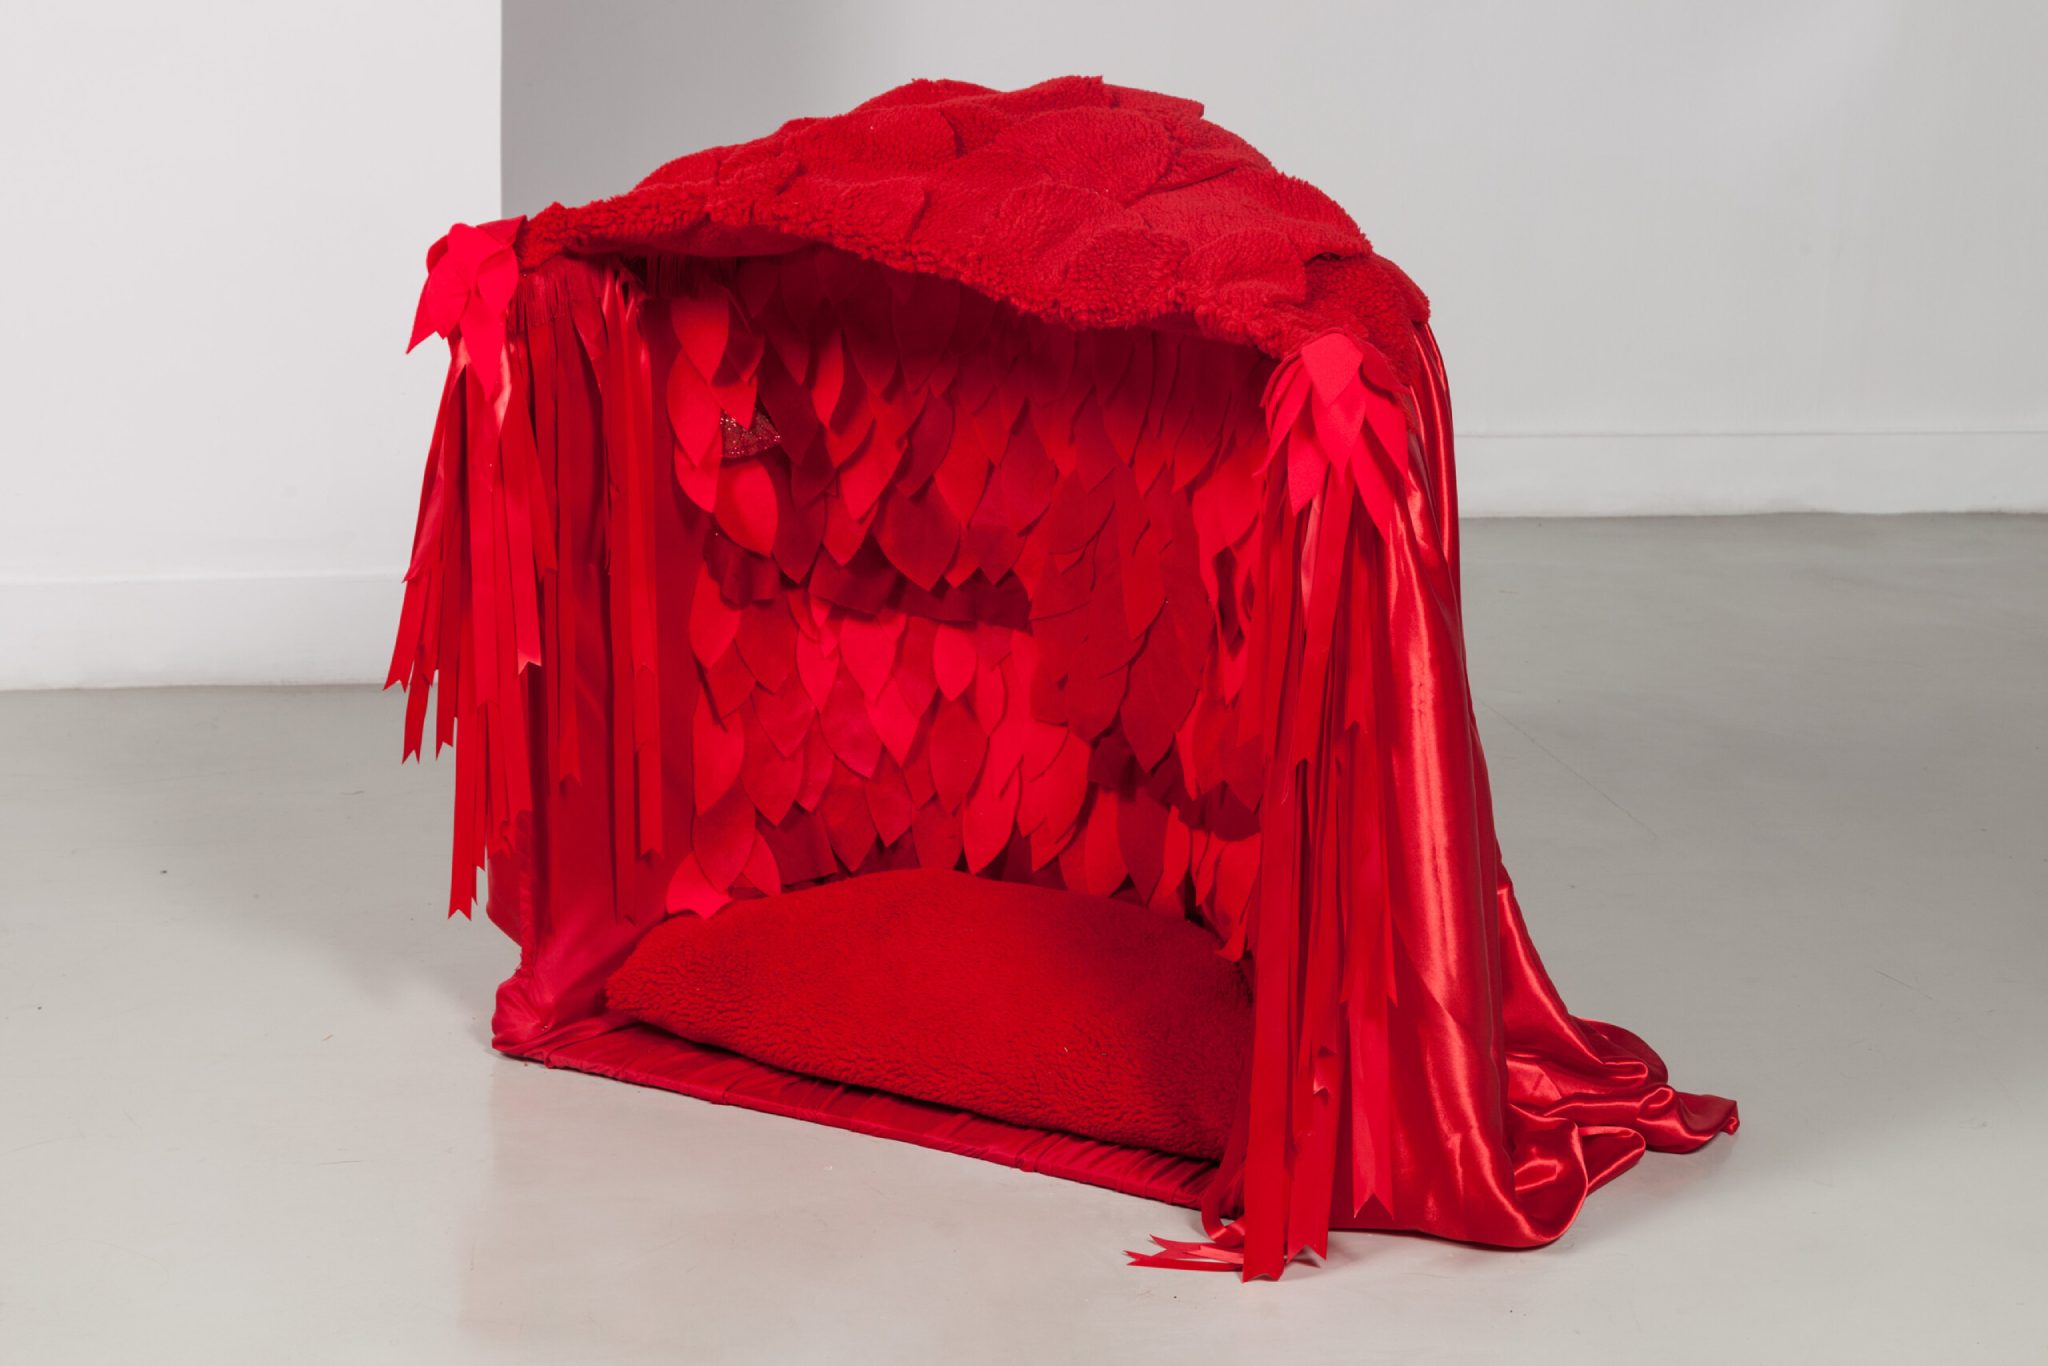 An exhibition showing a red fabric like structure